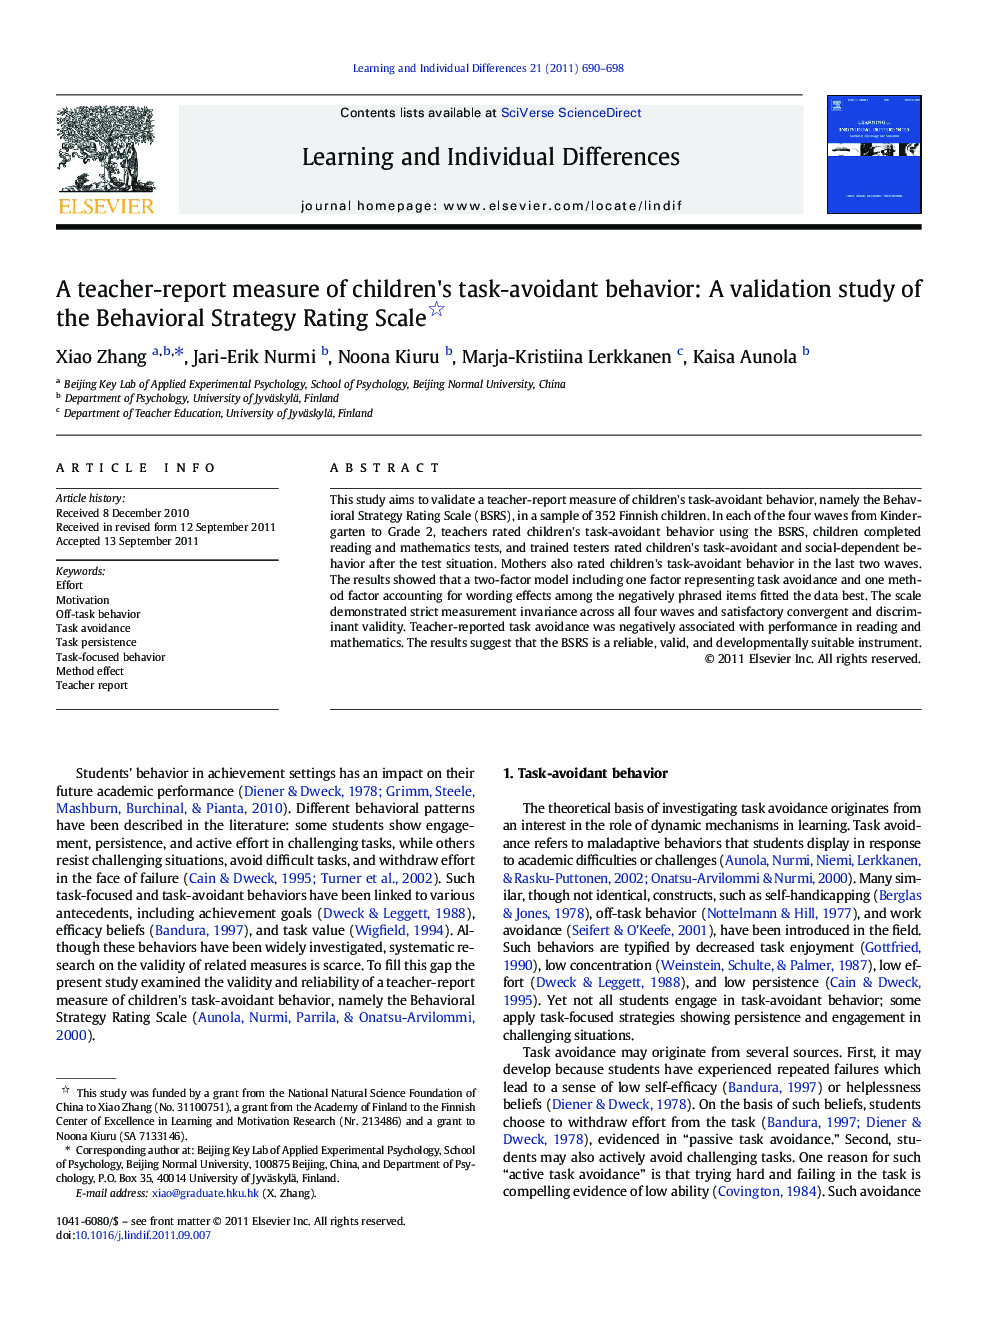 A teacher-report measure of children's task-avoidant behavior: A validation study of the Behavioral Strategy Rating Scale